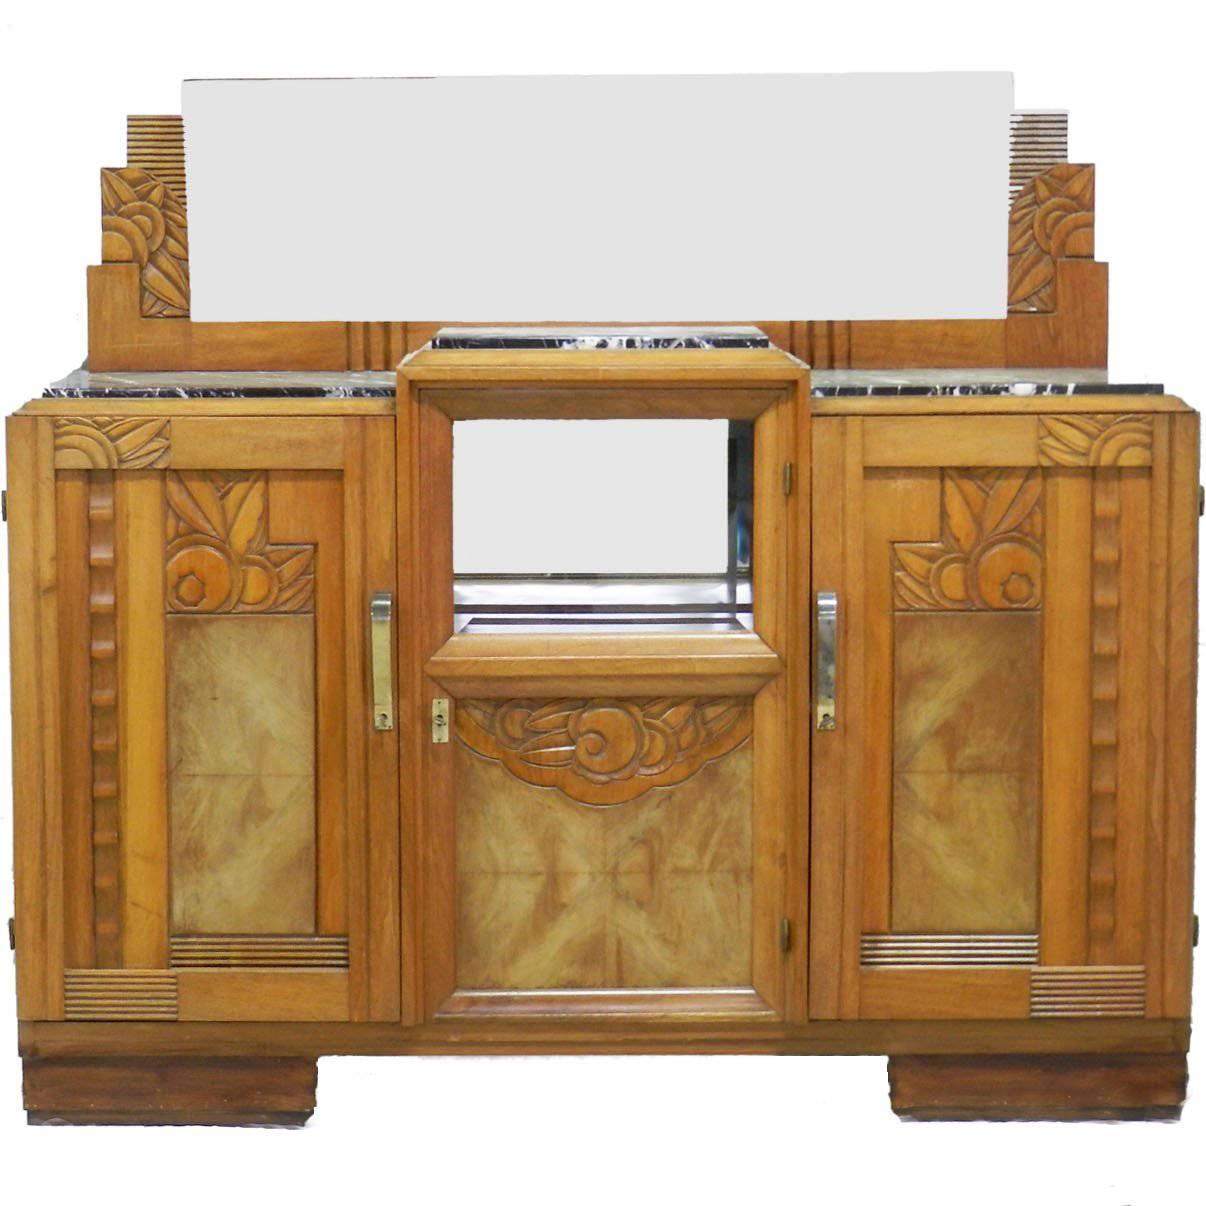 Art Deco Credenza Sideboard French, circa 1930 Sue et Mare Style Dresser Buffet For Sale